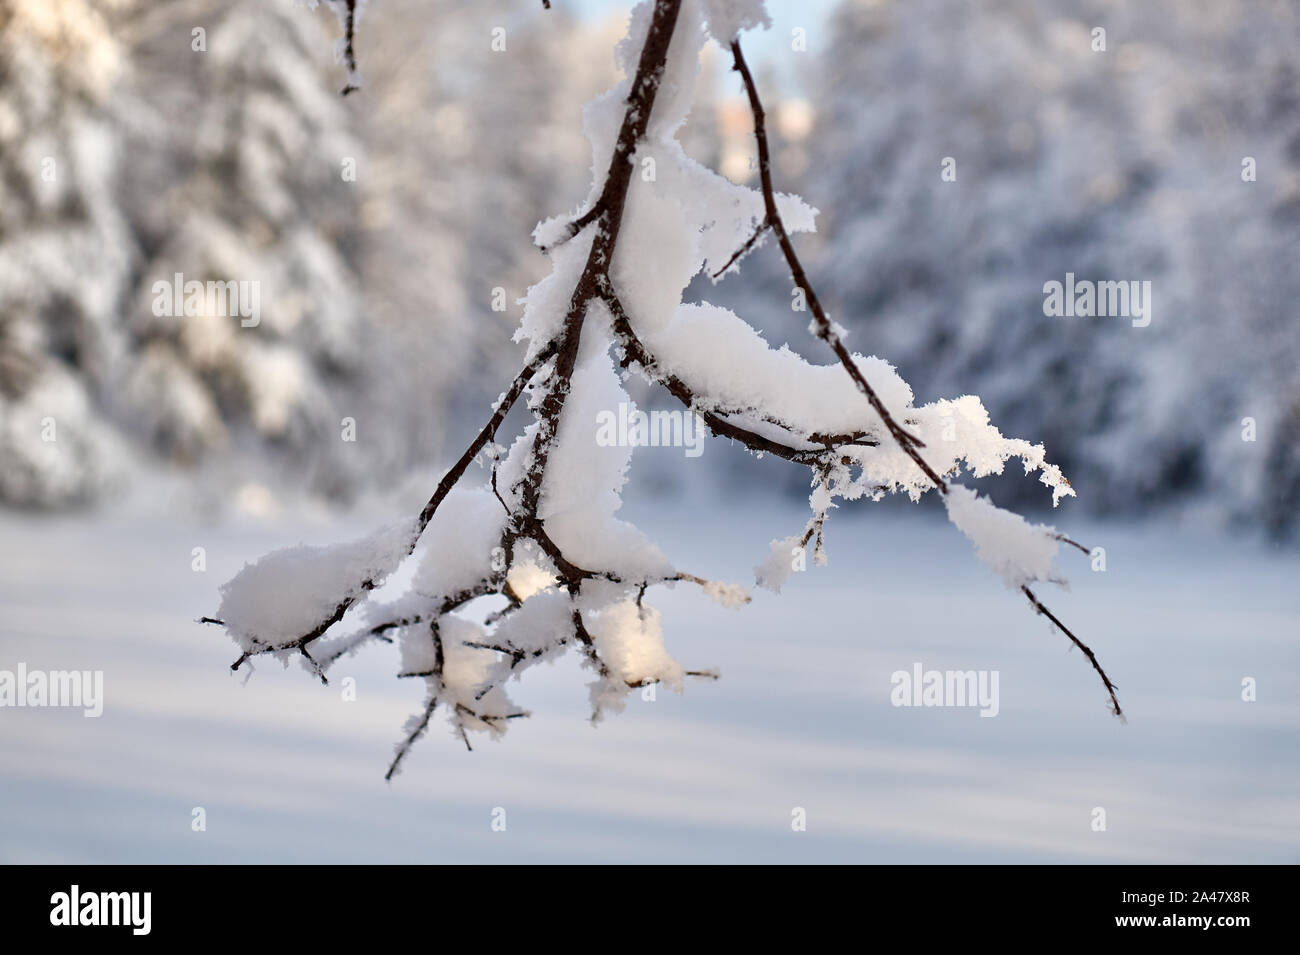 tree branch with adhering snow on a frosty winter day Stock Photo